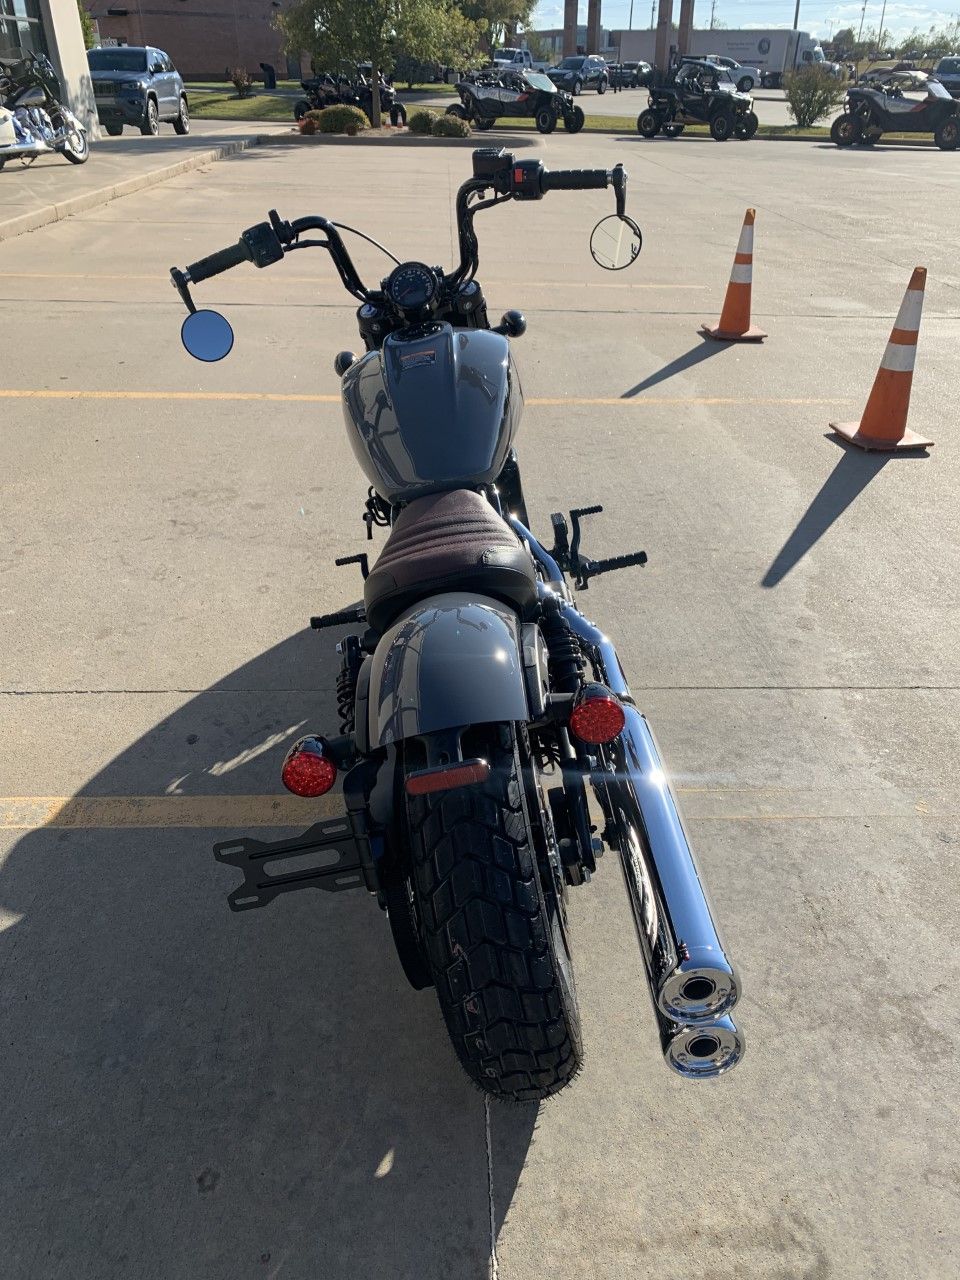 2022 Indian Motorcycle Scout® Bobber Twenty ABS in Norman, Oklahoma - Photo 6